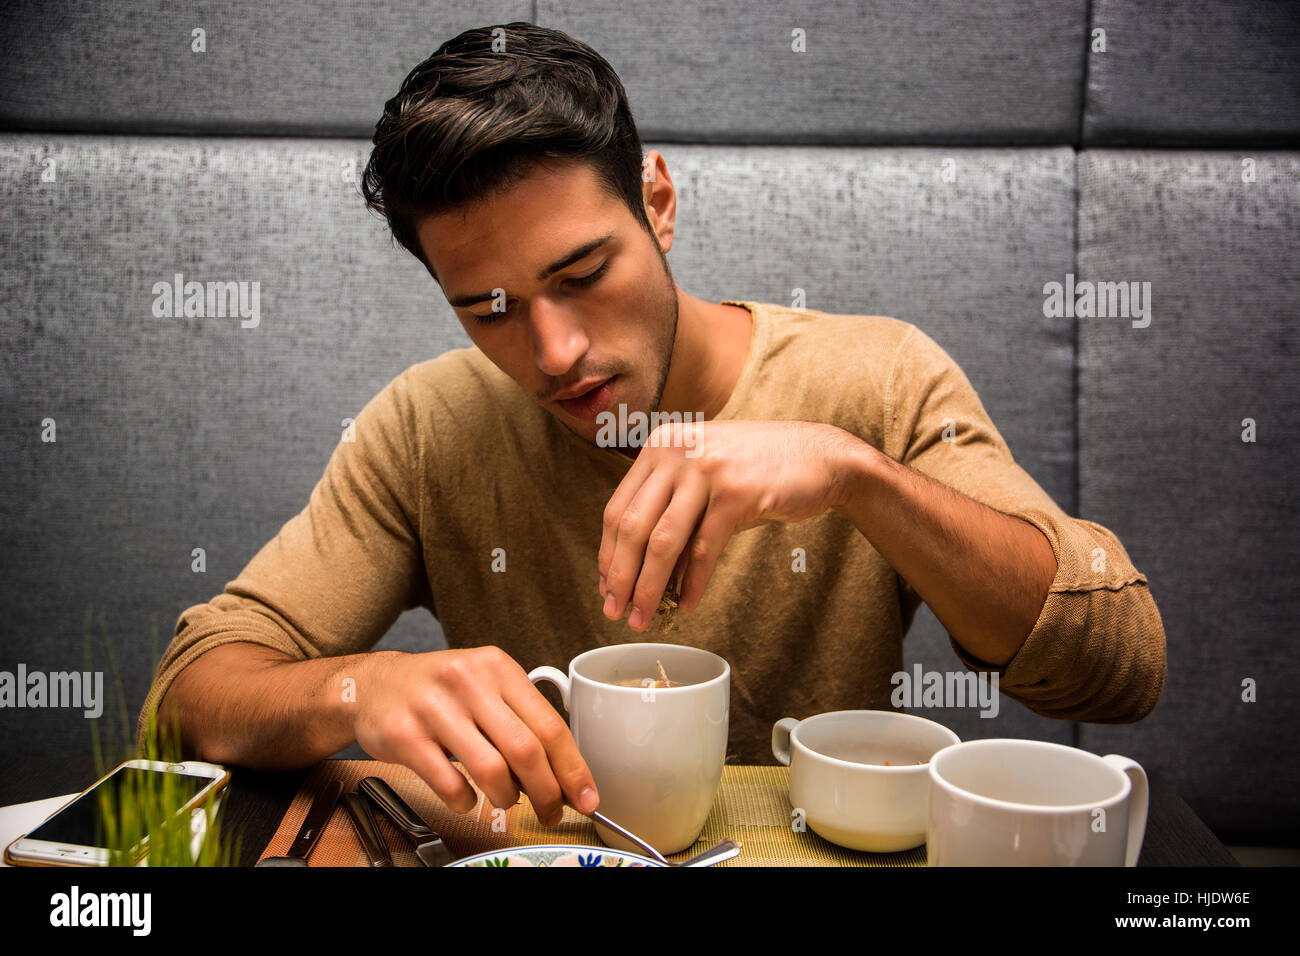 Attractive Young Man Eating Breakfast Stock Photo